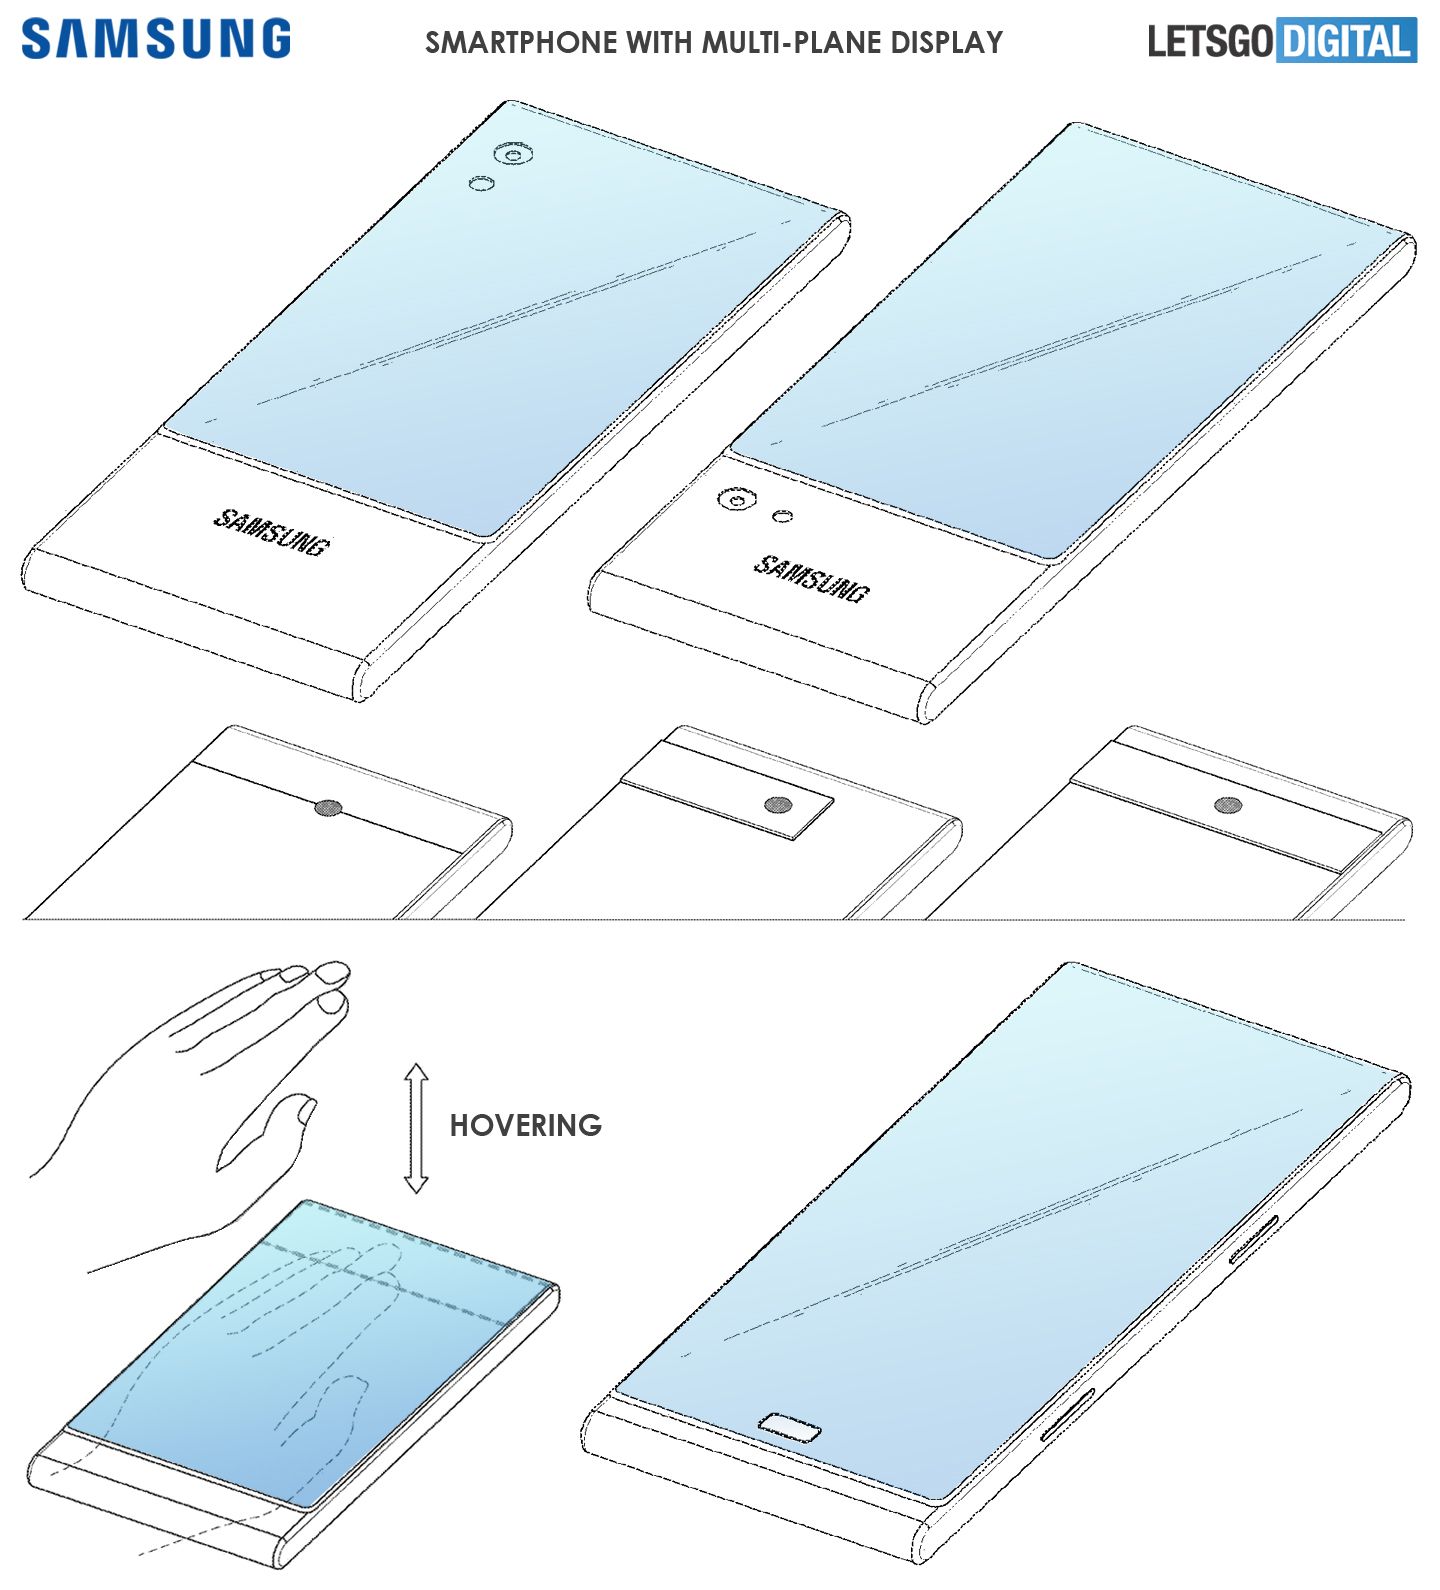 You Think Folding Phones Are Bonkers Take A Look At Samsungs Continuous Display Device image 2